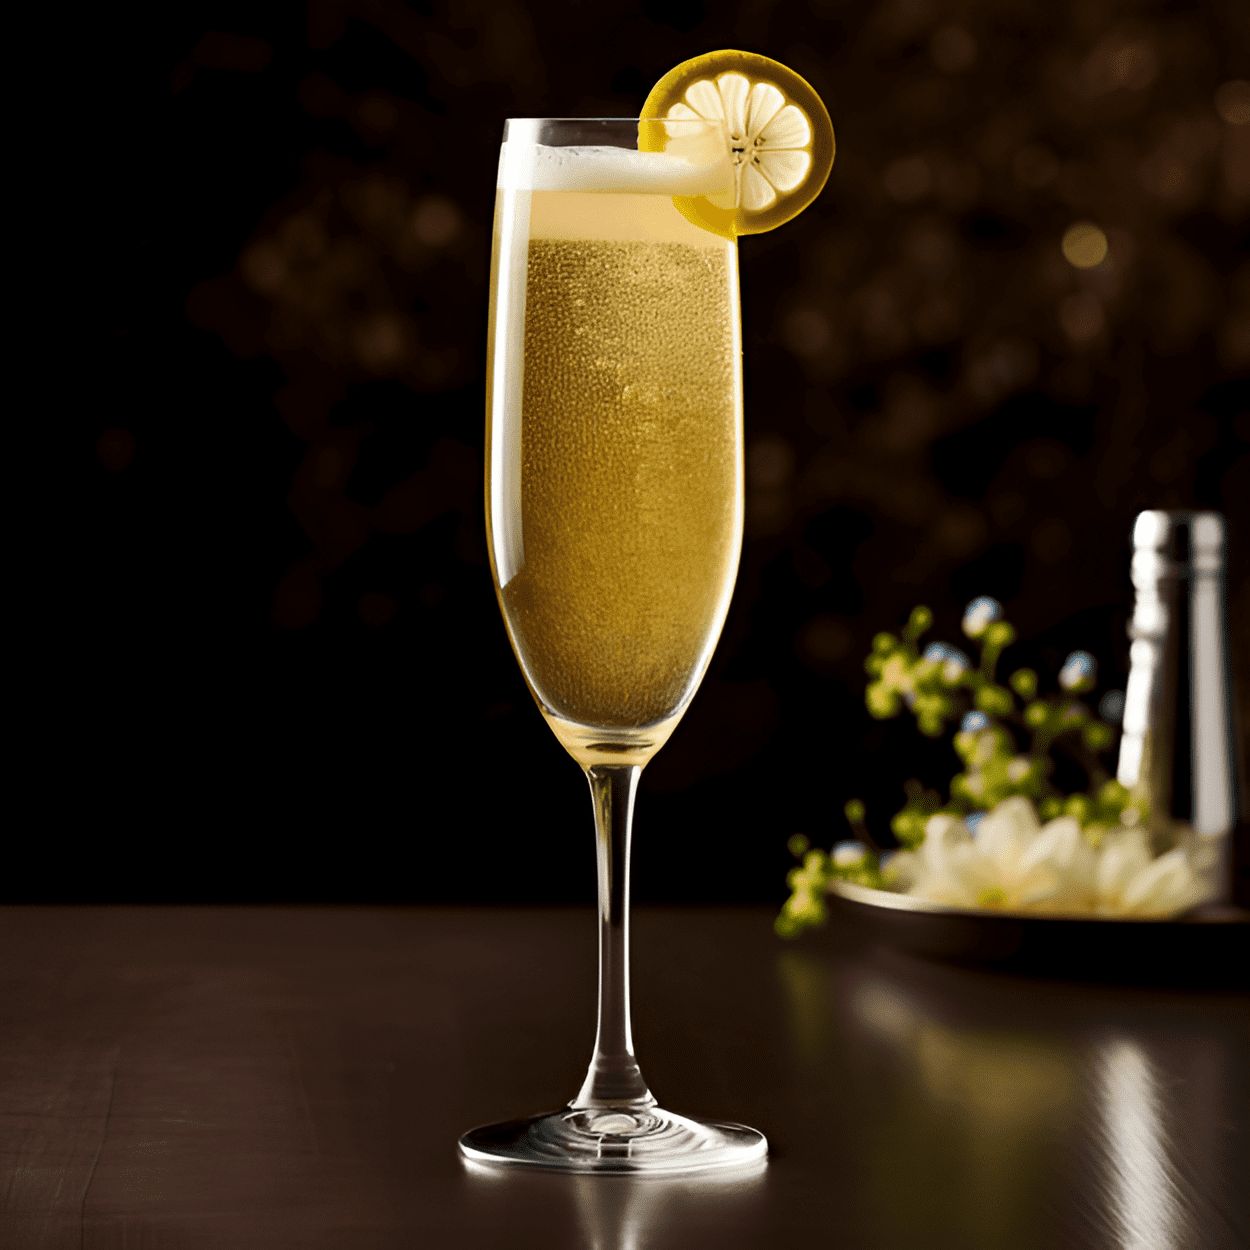 Chicago Cocktail Recipe - The Chicago Cocktail is a well-balanced blend of flavors. The brandy provides a warm, rich base, while the triple sec adds a hint of citrusy sweetness. The bitters bring a subtle complexity, and the champagne gives it a light, bubbly finish. It's slightly sweet, a bit tangy, and wonderfully effervescent.